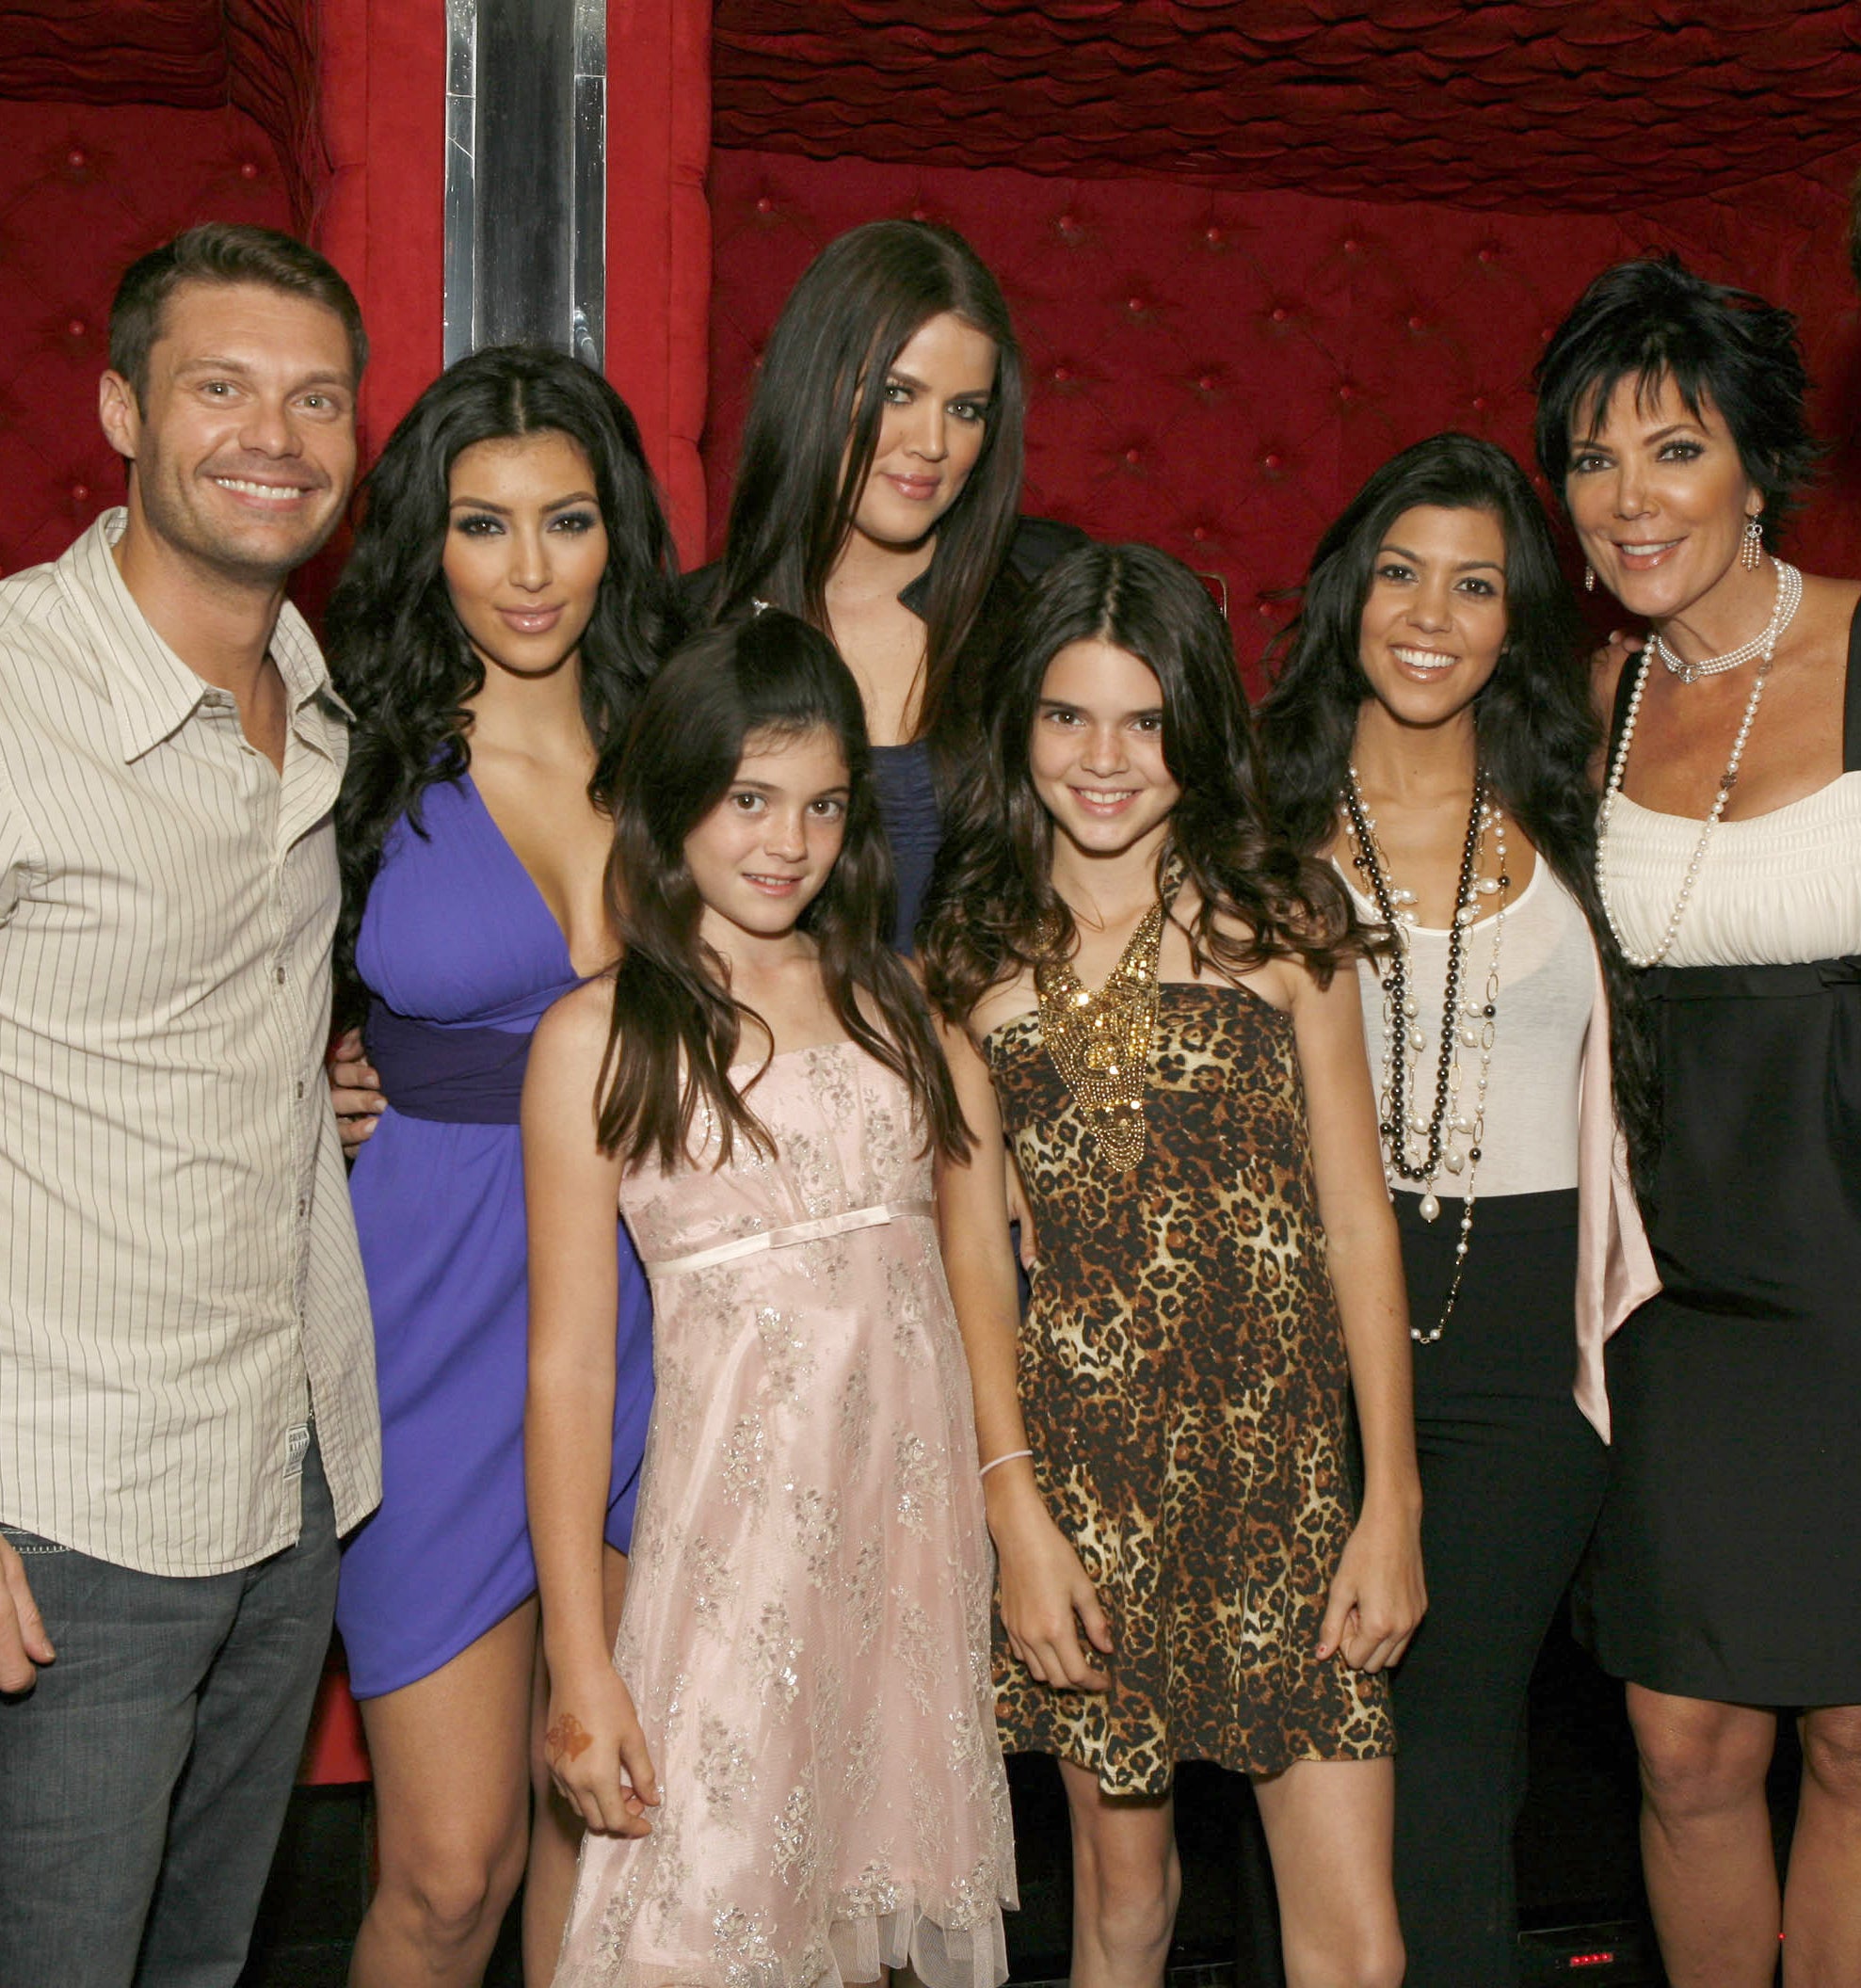 The Kardashian and Jenner families